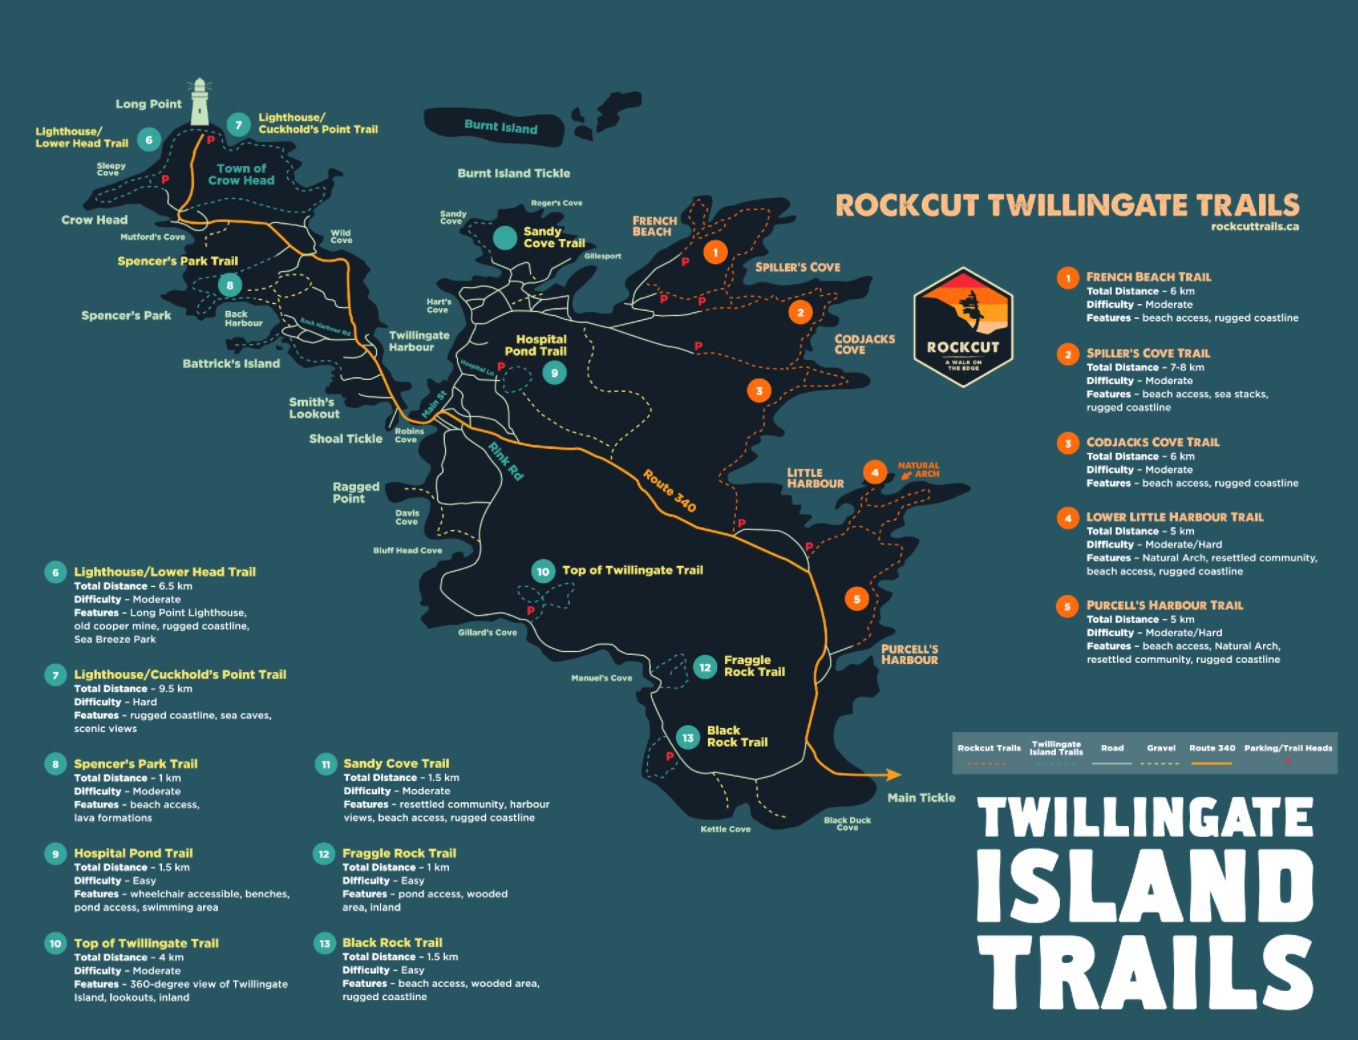 Map of Twillingate's Rockcut trails and other hiking trails in the region.